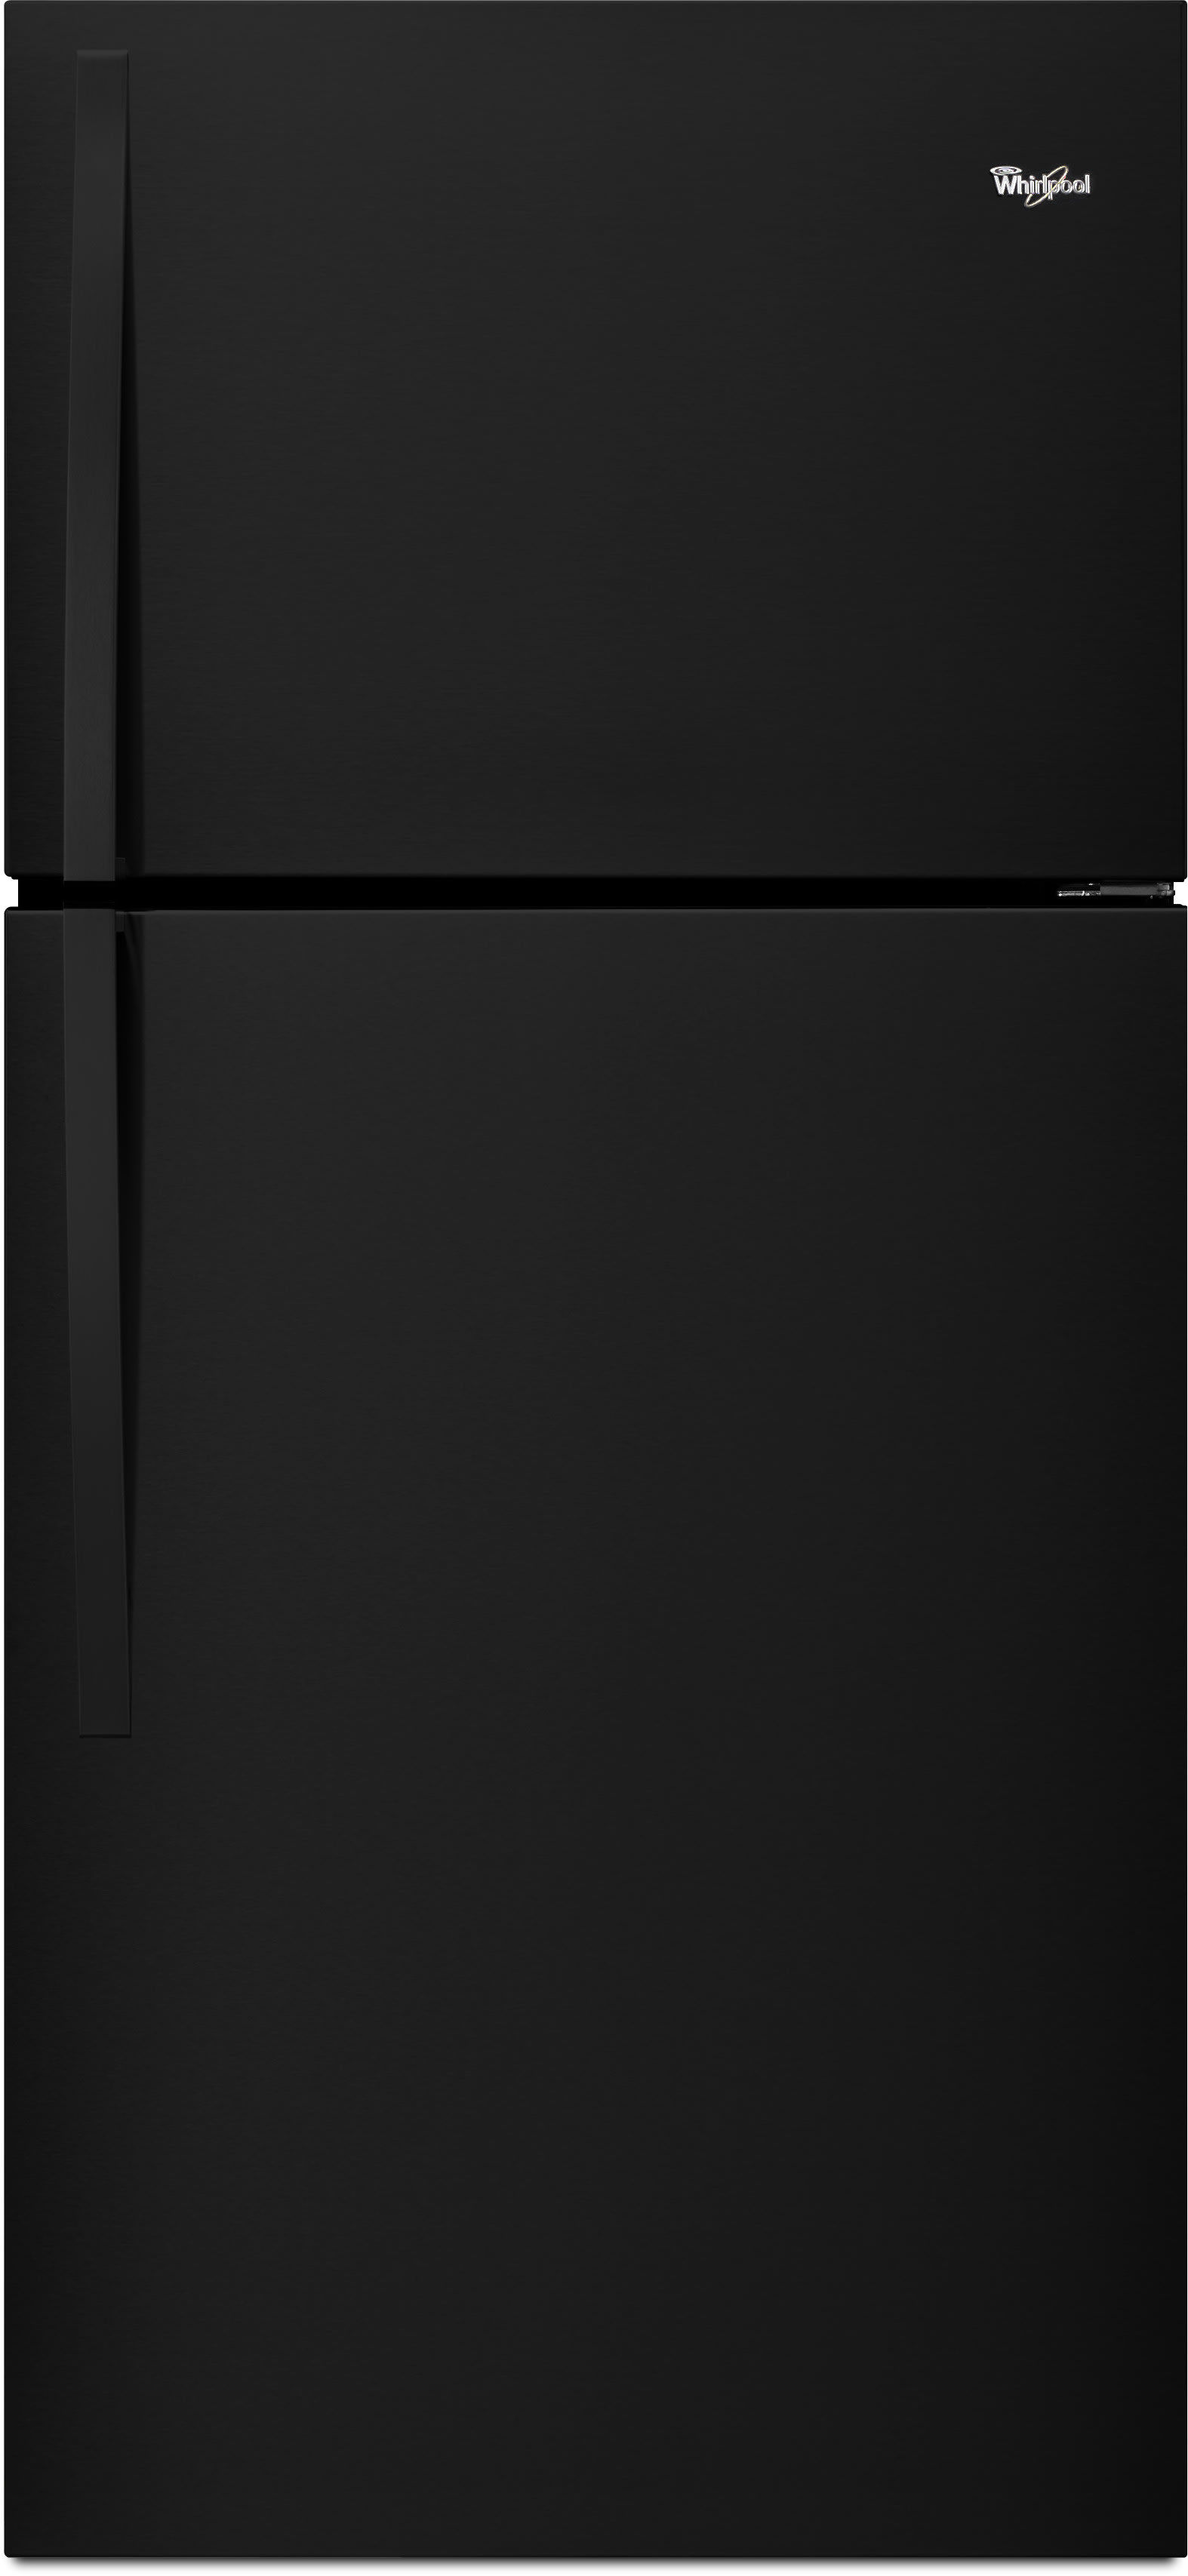 GDF535PGRBB by GE Appliances - GE® ENERGY STAR® Dishwasher with